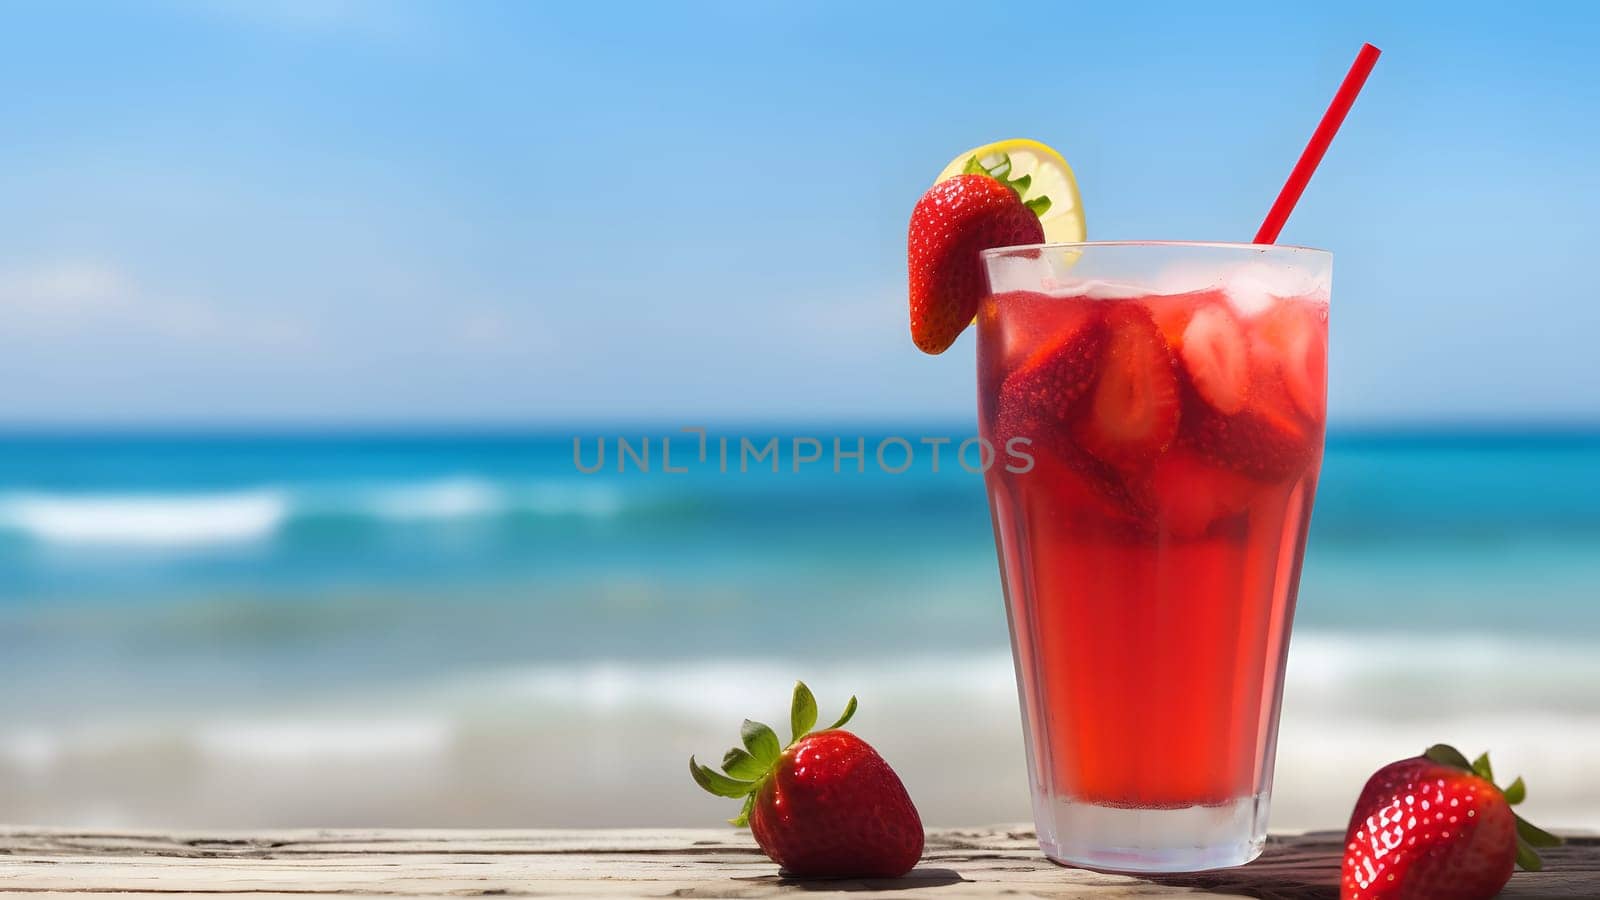 A glass of strawberries cold refreshing drink on sea background at sunny summer day, neural network generated image by z1b